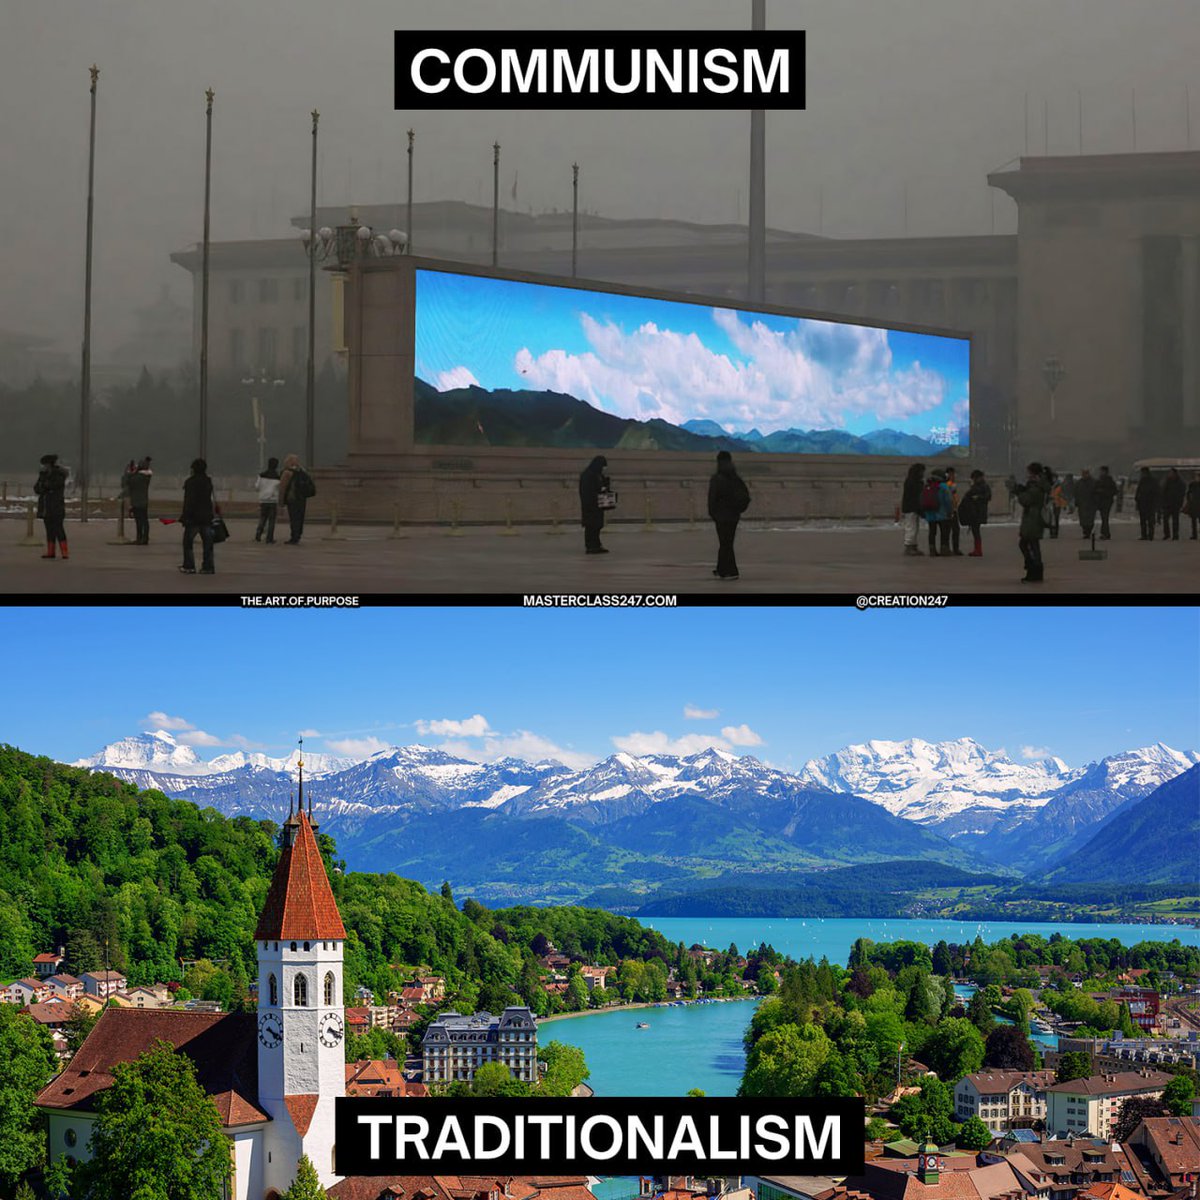 Communism has failed everywhere it's been tried... Why is that?